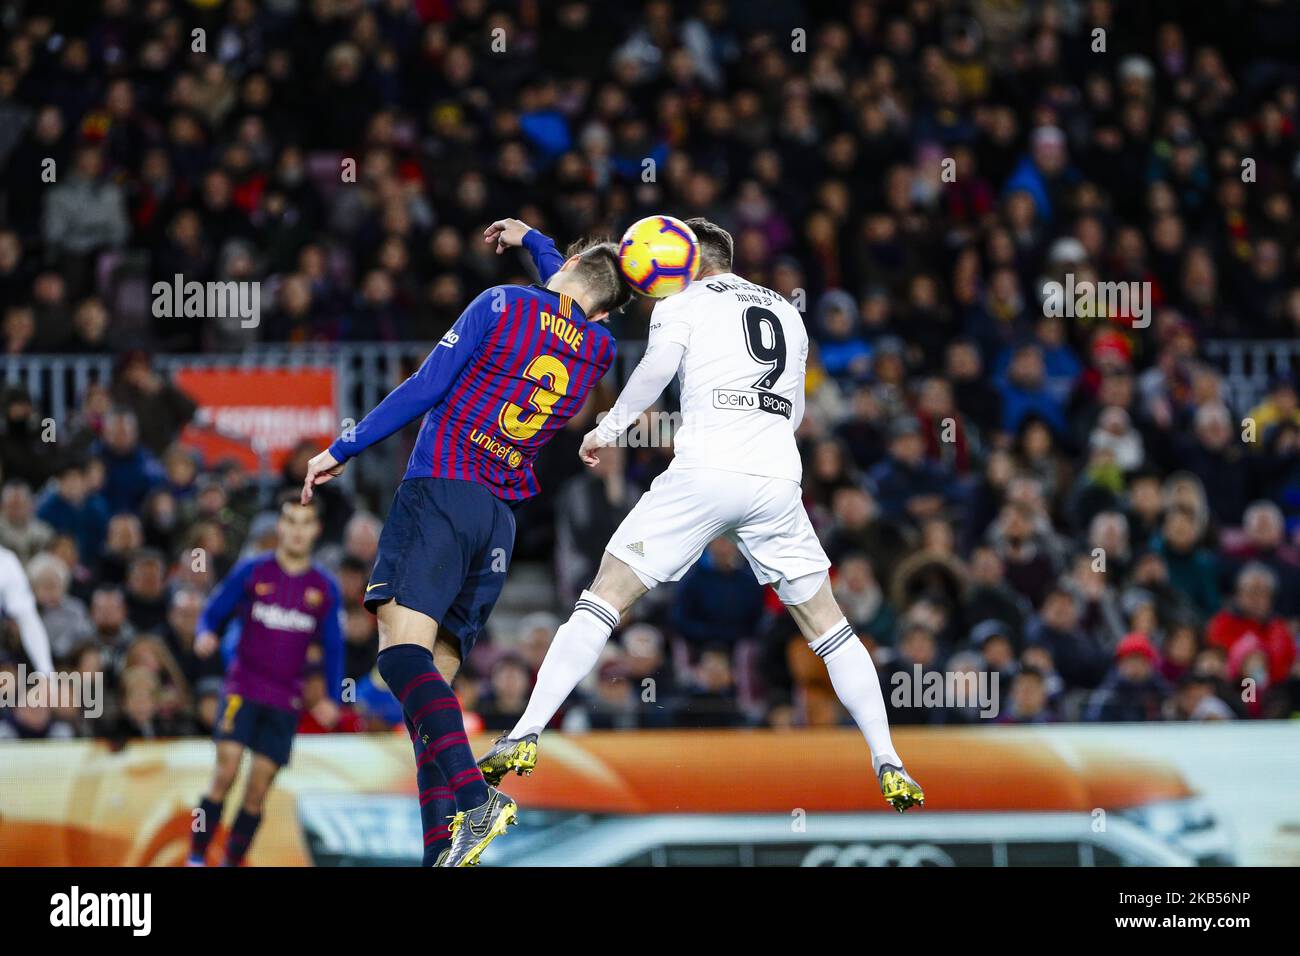 FC Barcelona defender Gerard Pique (3) and Valencia CF forward Kevin Gameiro (9) during the match FC Barcelona against CD Valencia CF, for the round 22 of the Liga Santander, played at Camp Nou on February 2, 2019 in Barcelona, Spain. (Photo by Urbanandsport/NurPhoto) Stock Photo